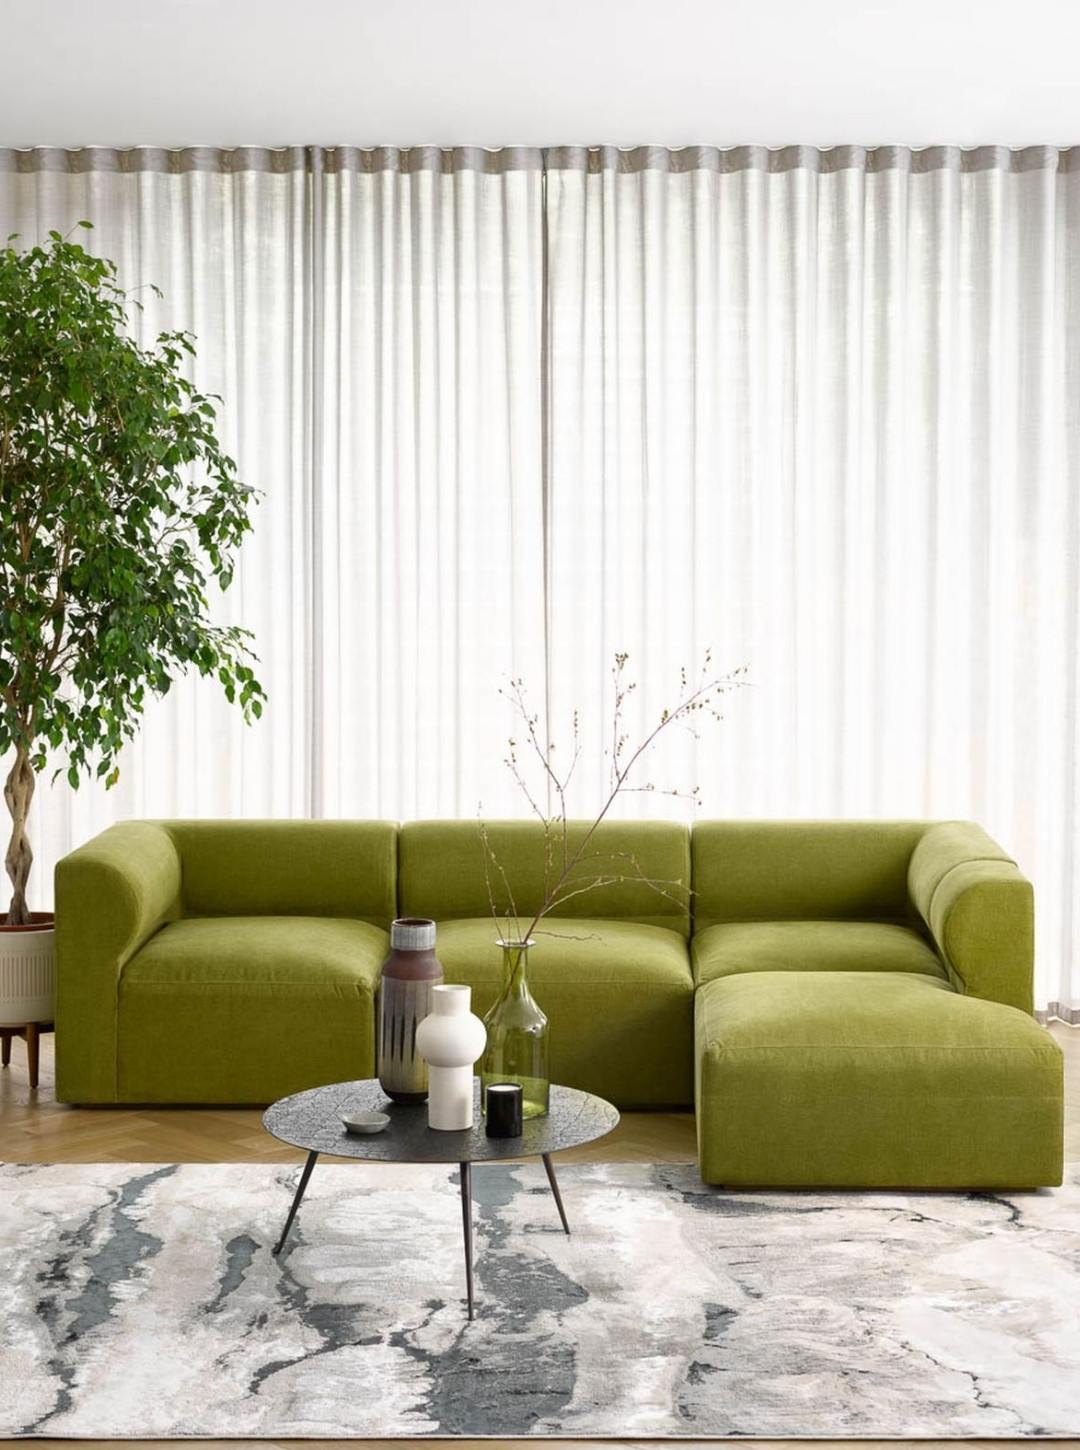 seating furniture trends, Spotlight on Trending Styles and Fabrics at Sofa.com